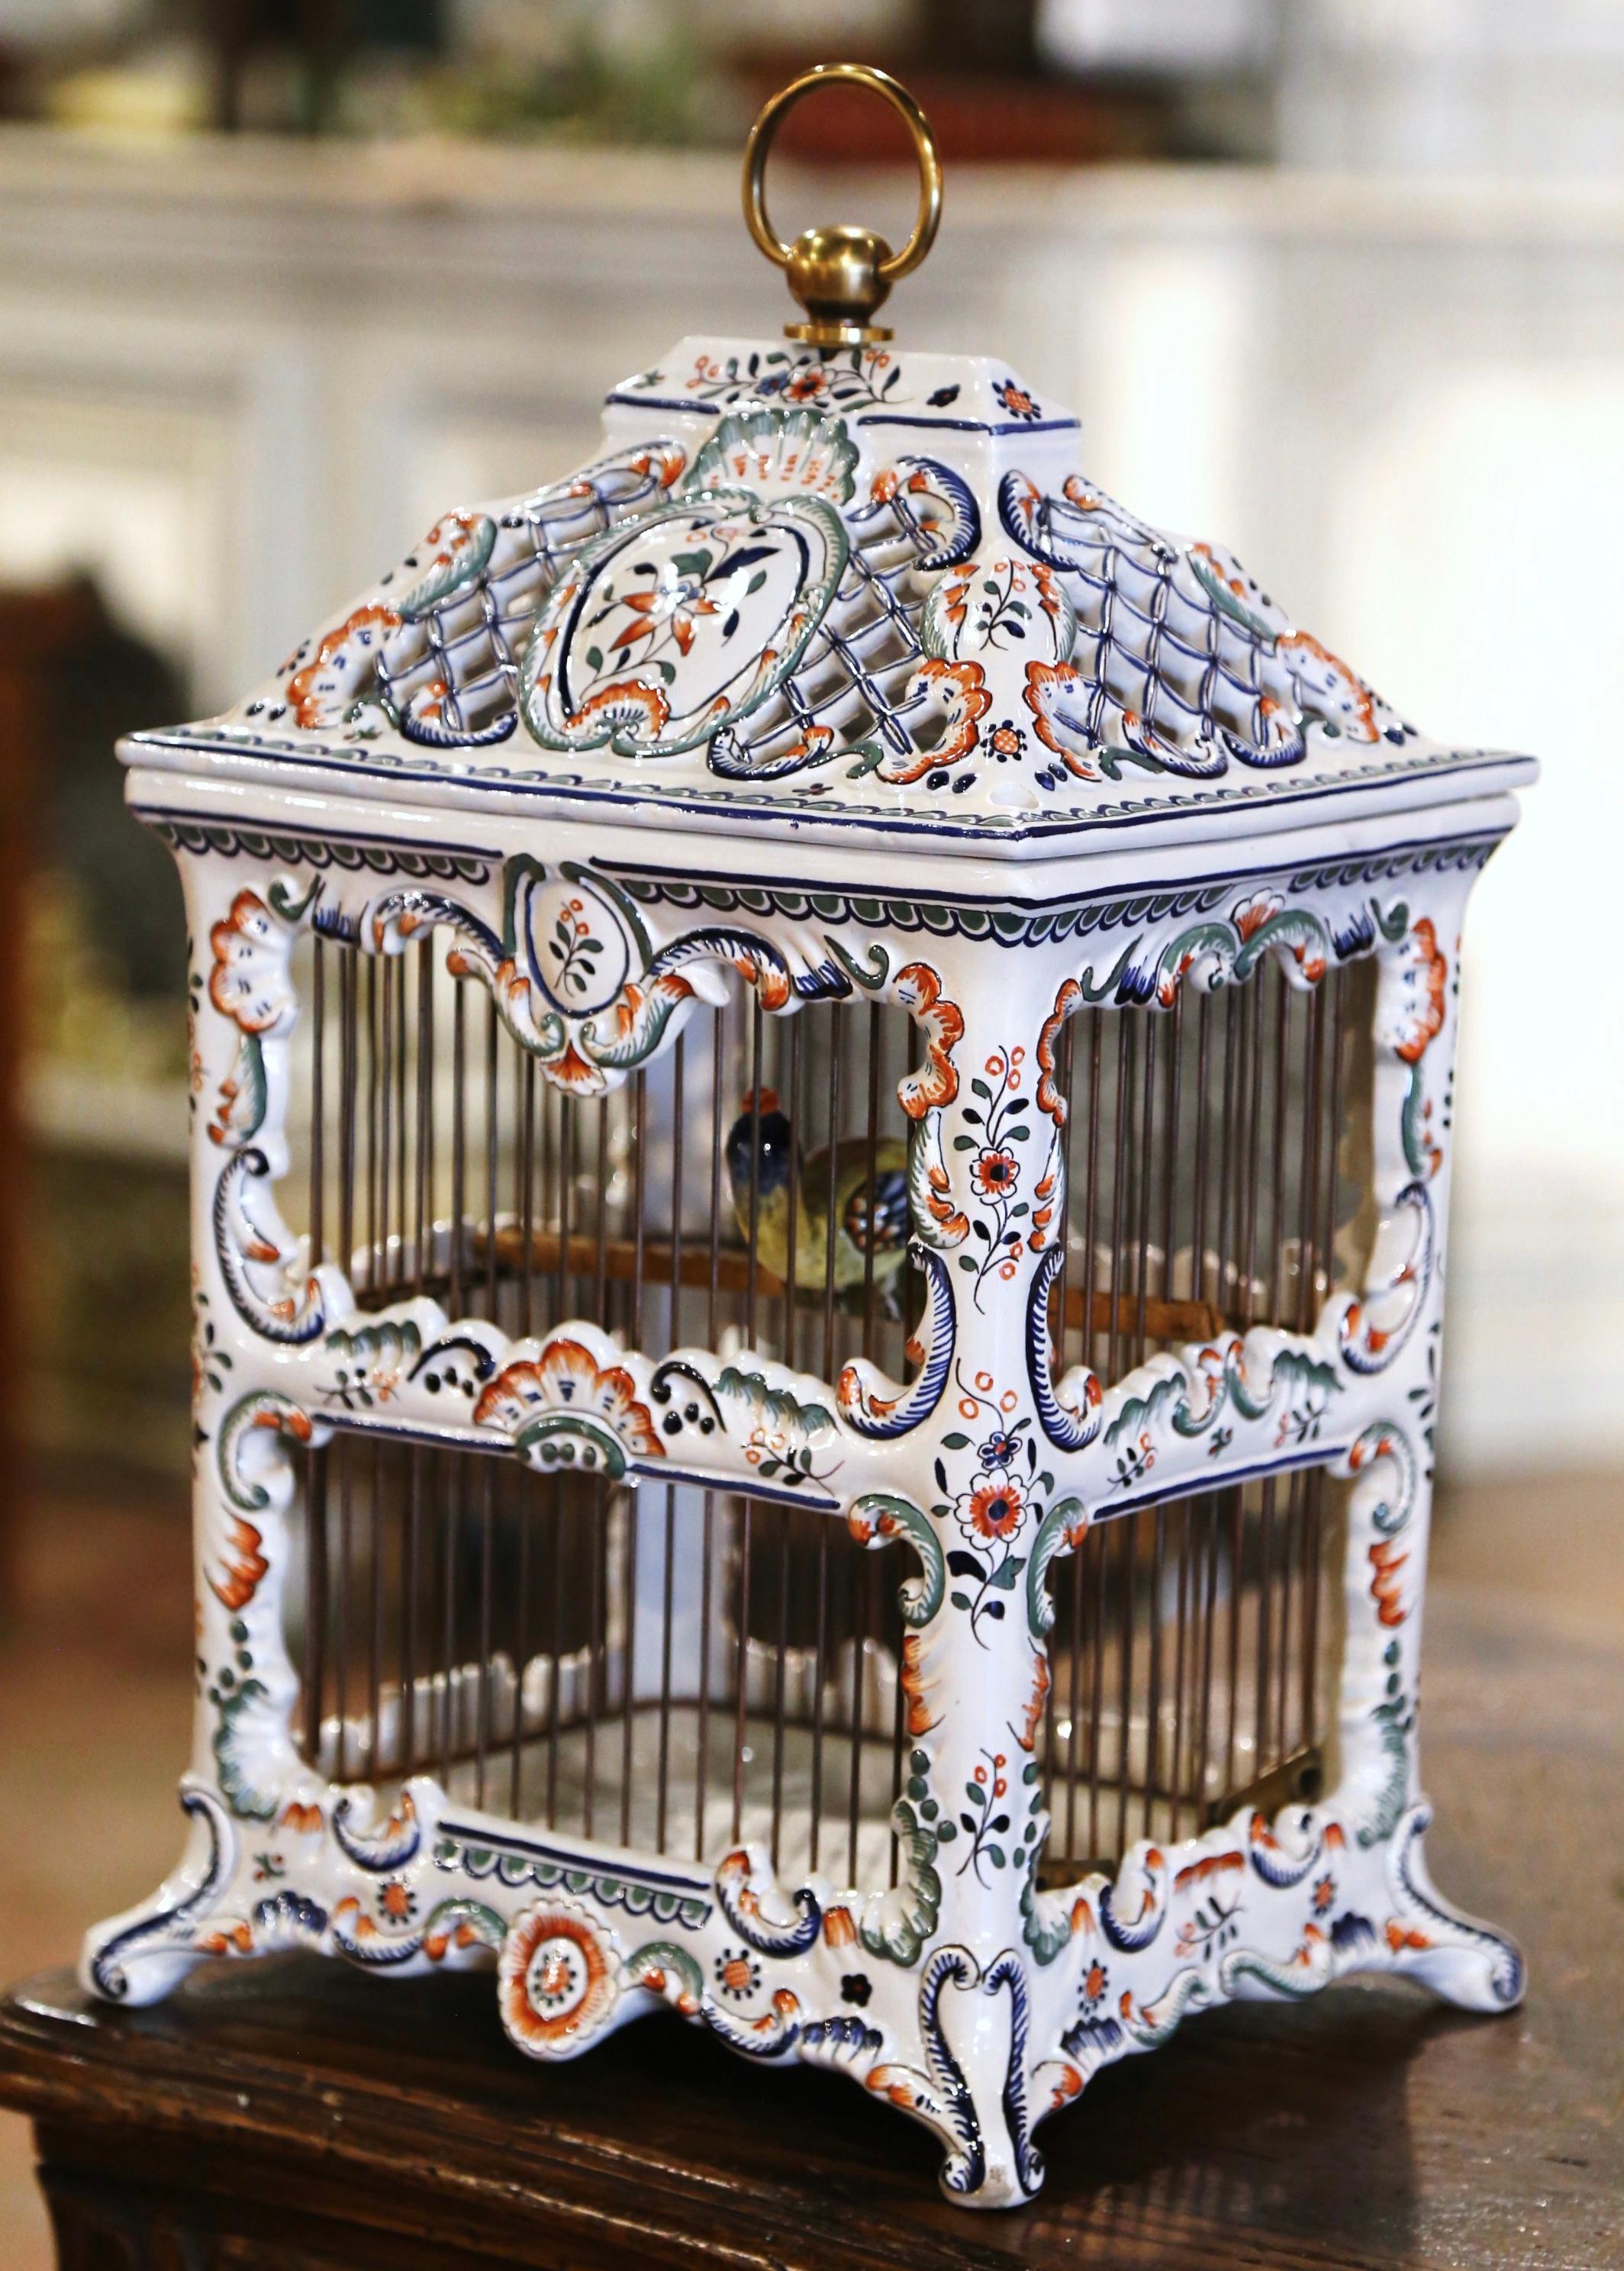 This beautiful, feminine decorative porcelain birdcage would make a lovely addition to a woman's office or study. Crafted in Rouen, Normandy circa 1950, and built of faience, the cage stands on scroll feet over a scalloped apron decorated with